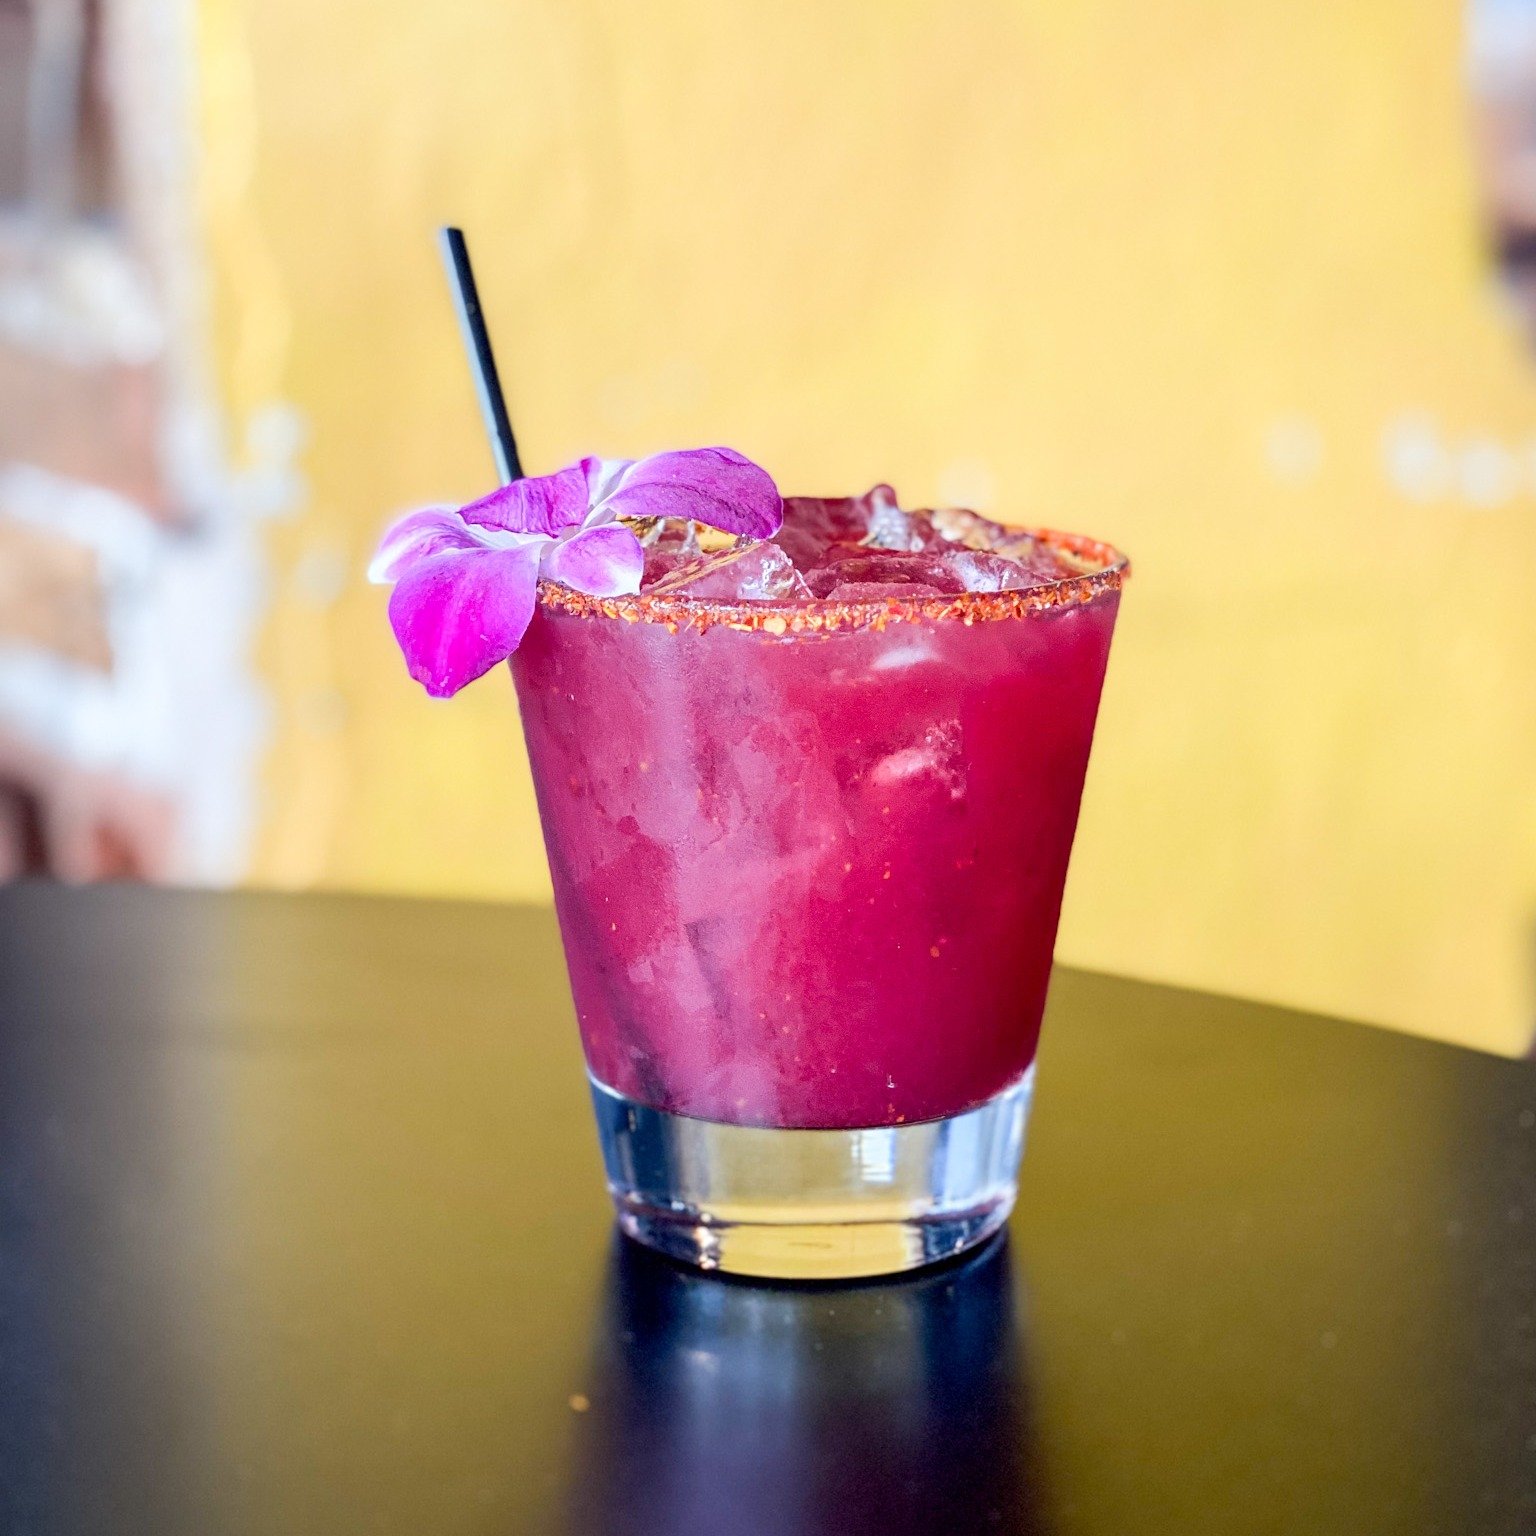 Add some color to your day! 

Try our Spicy Blackberr-ita (FAN FAVORITE) | Cabo Wabo tequila, blackberry brandy, blackberry puree, jalape&ntilde;o agave syrup, muddled jalape&ntilde;os, tajin rim

#tulsabites #tulsaeats #tulsafoodie #brooksidetulsa